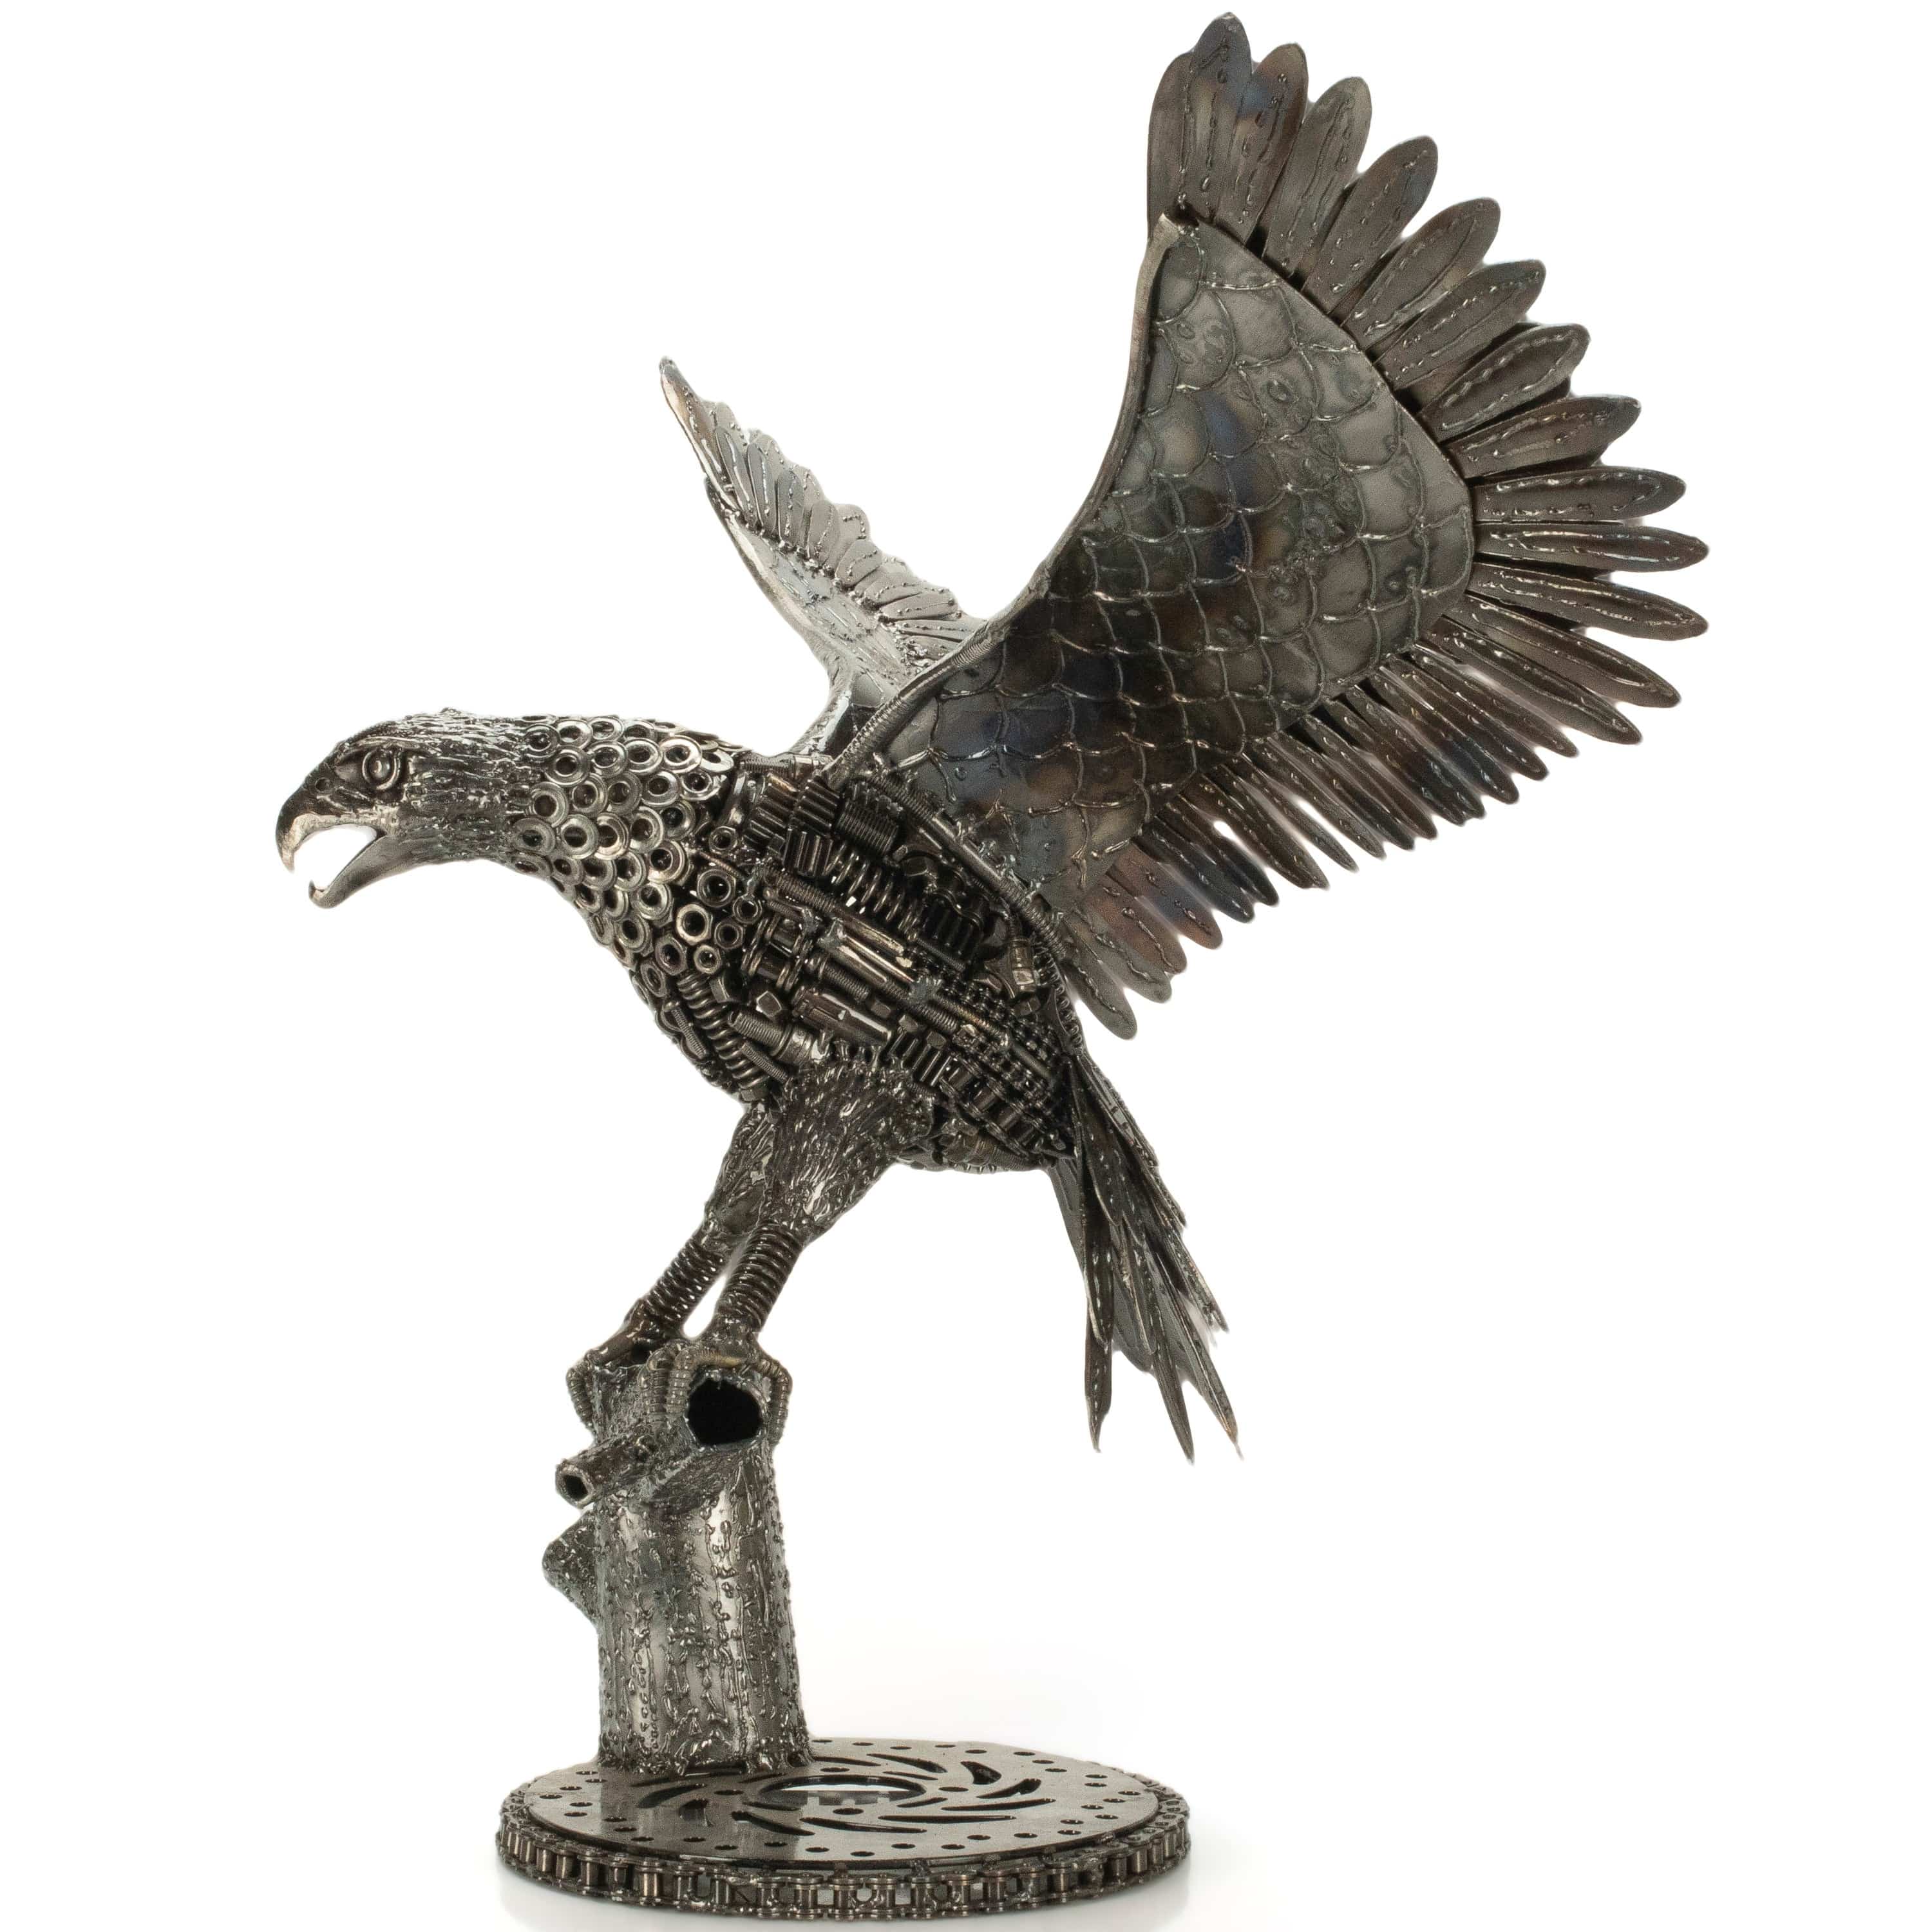 KALIFANO Recycled Metal Art 24" Majestic Eagle Inspired Recycled Metal Art Sculpture RMS-EAG43x60-PK